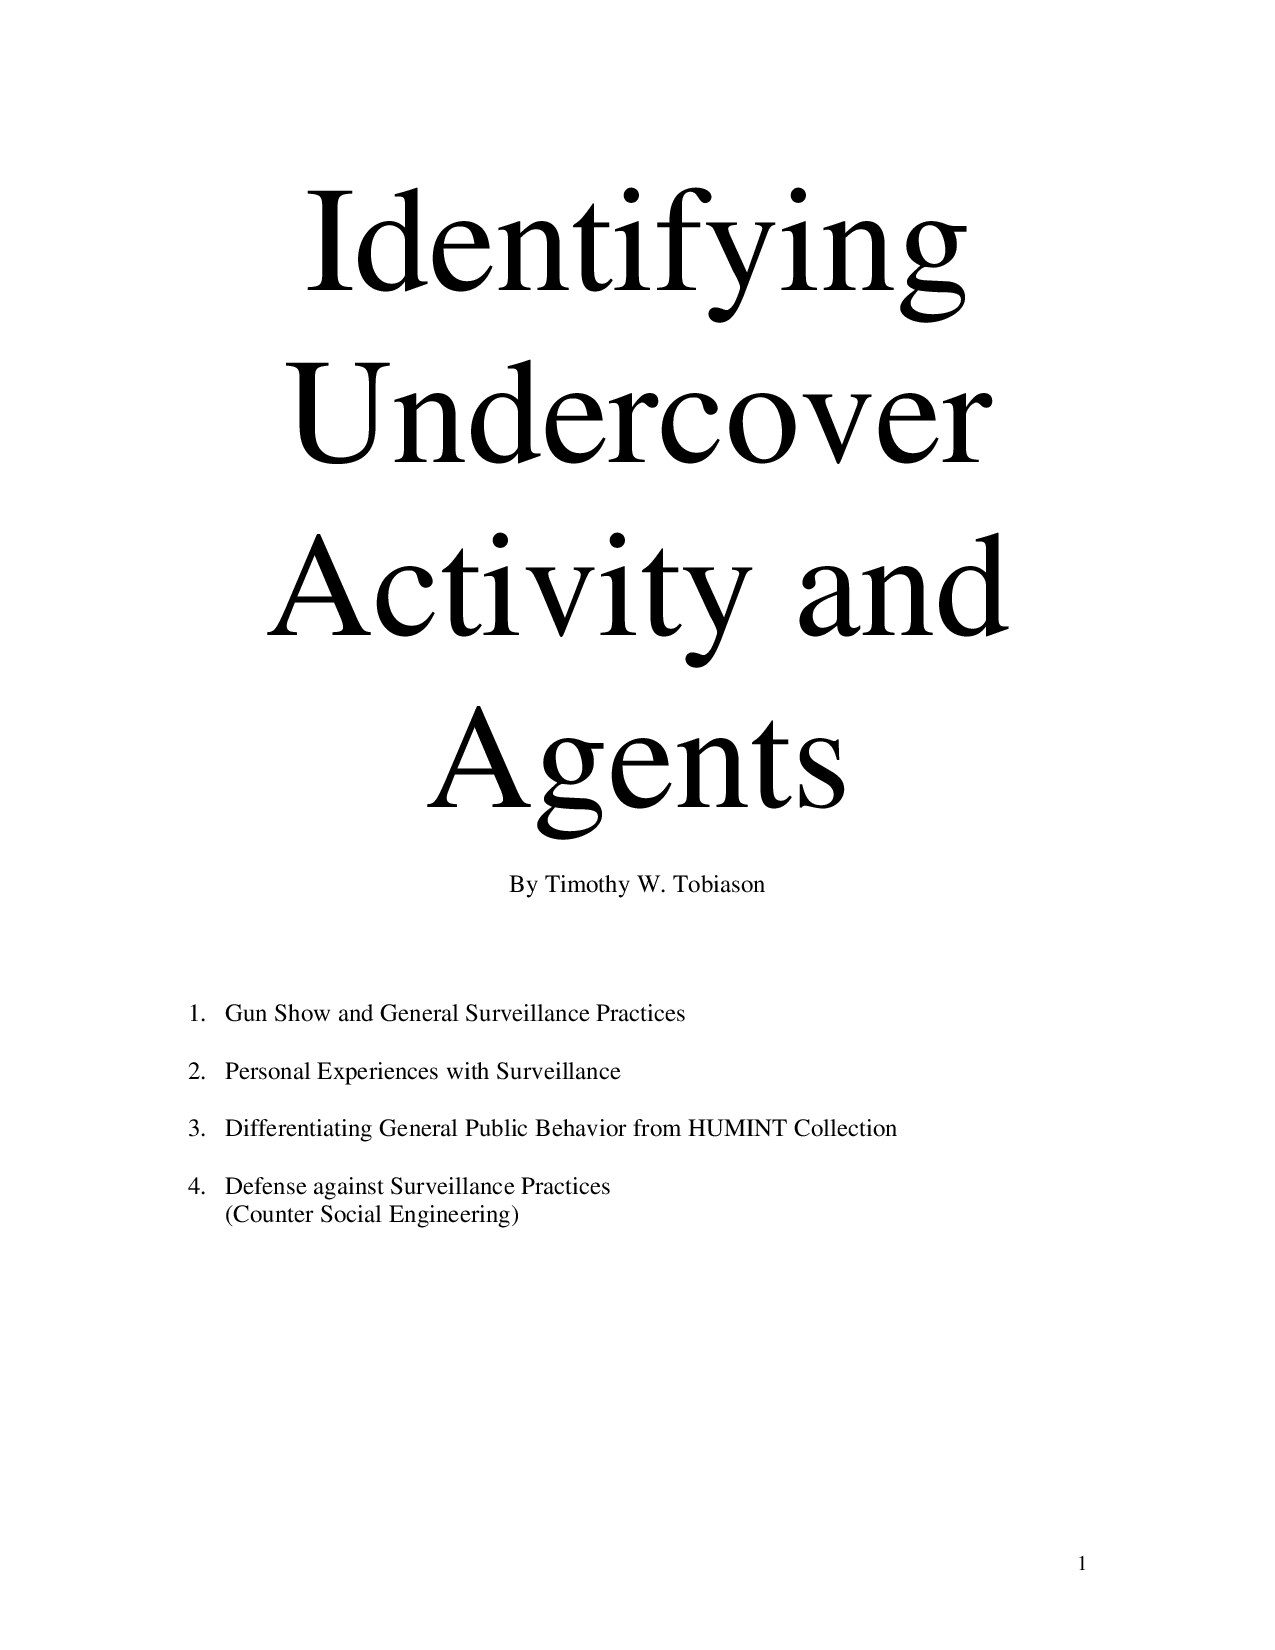 Identifying Undercover Activity and Agents